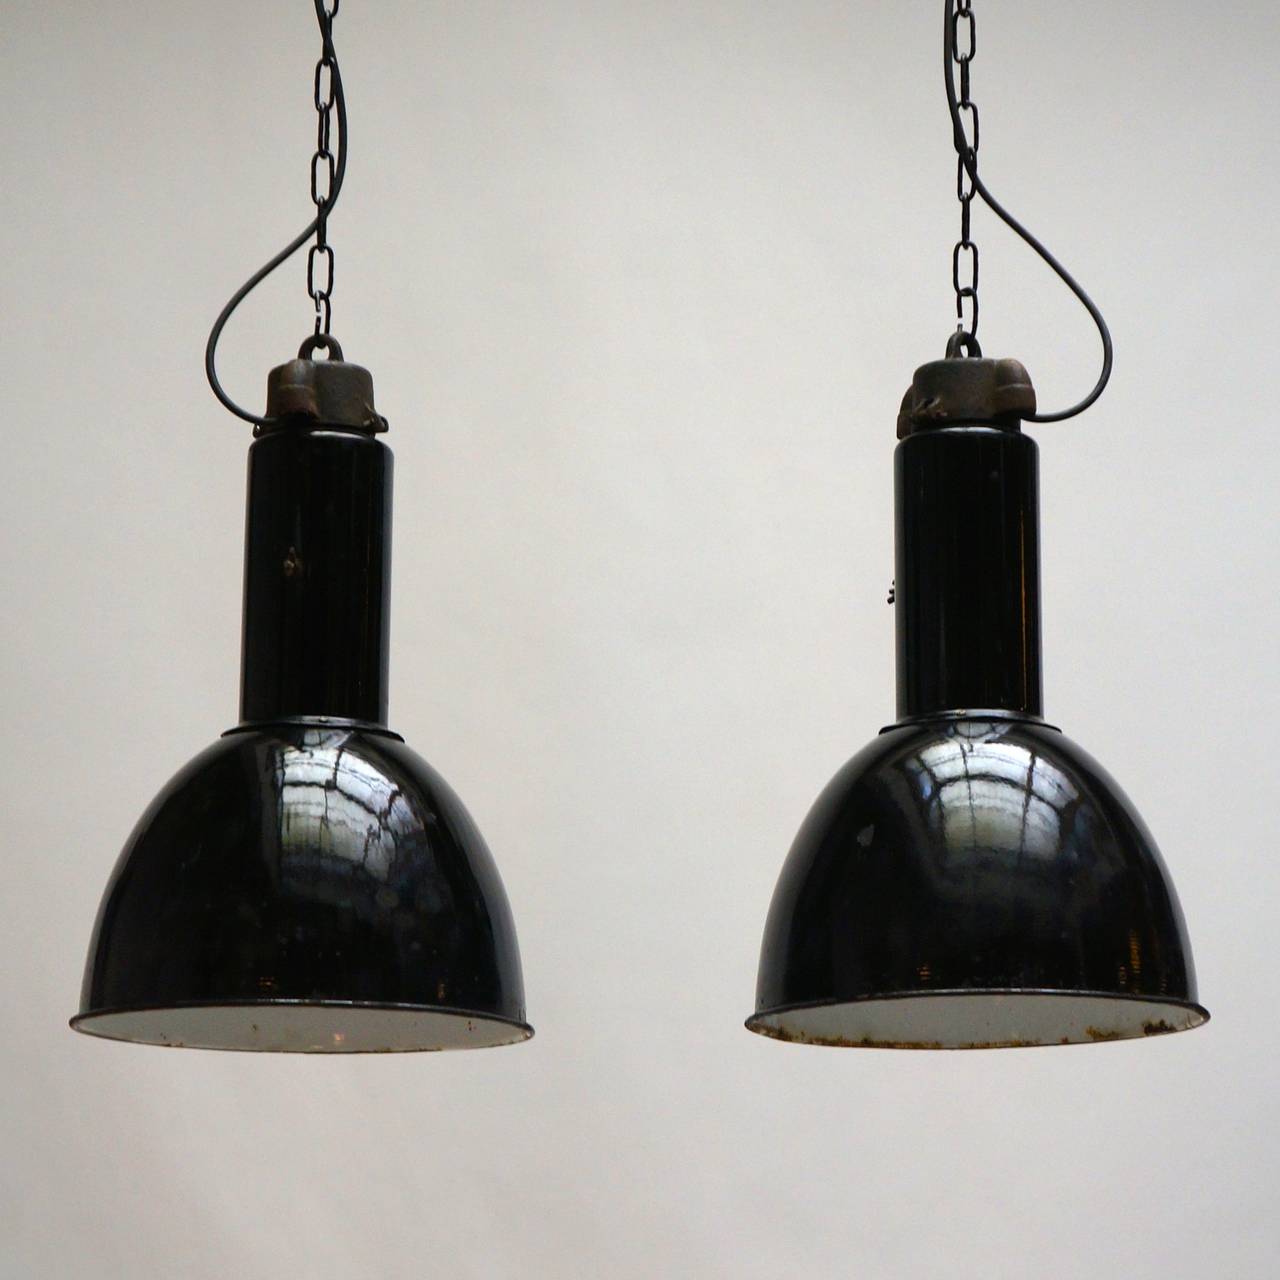 Two very similar Industrial factory pendant lights, in black enameled steel. Wired and ready to be hung.
Measures: Diameter 36 cm.
Height 55 cm.
Total height with the chain is 100 cm.